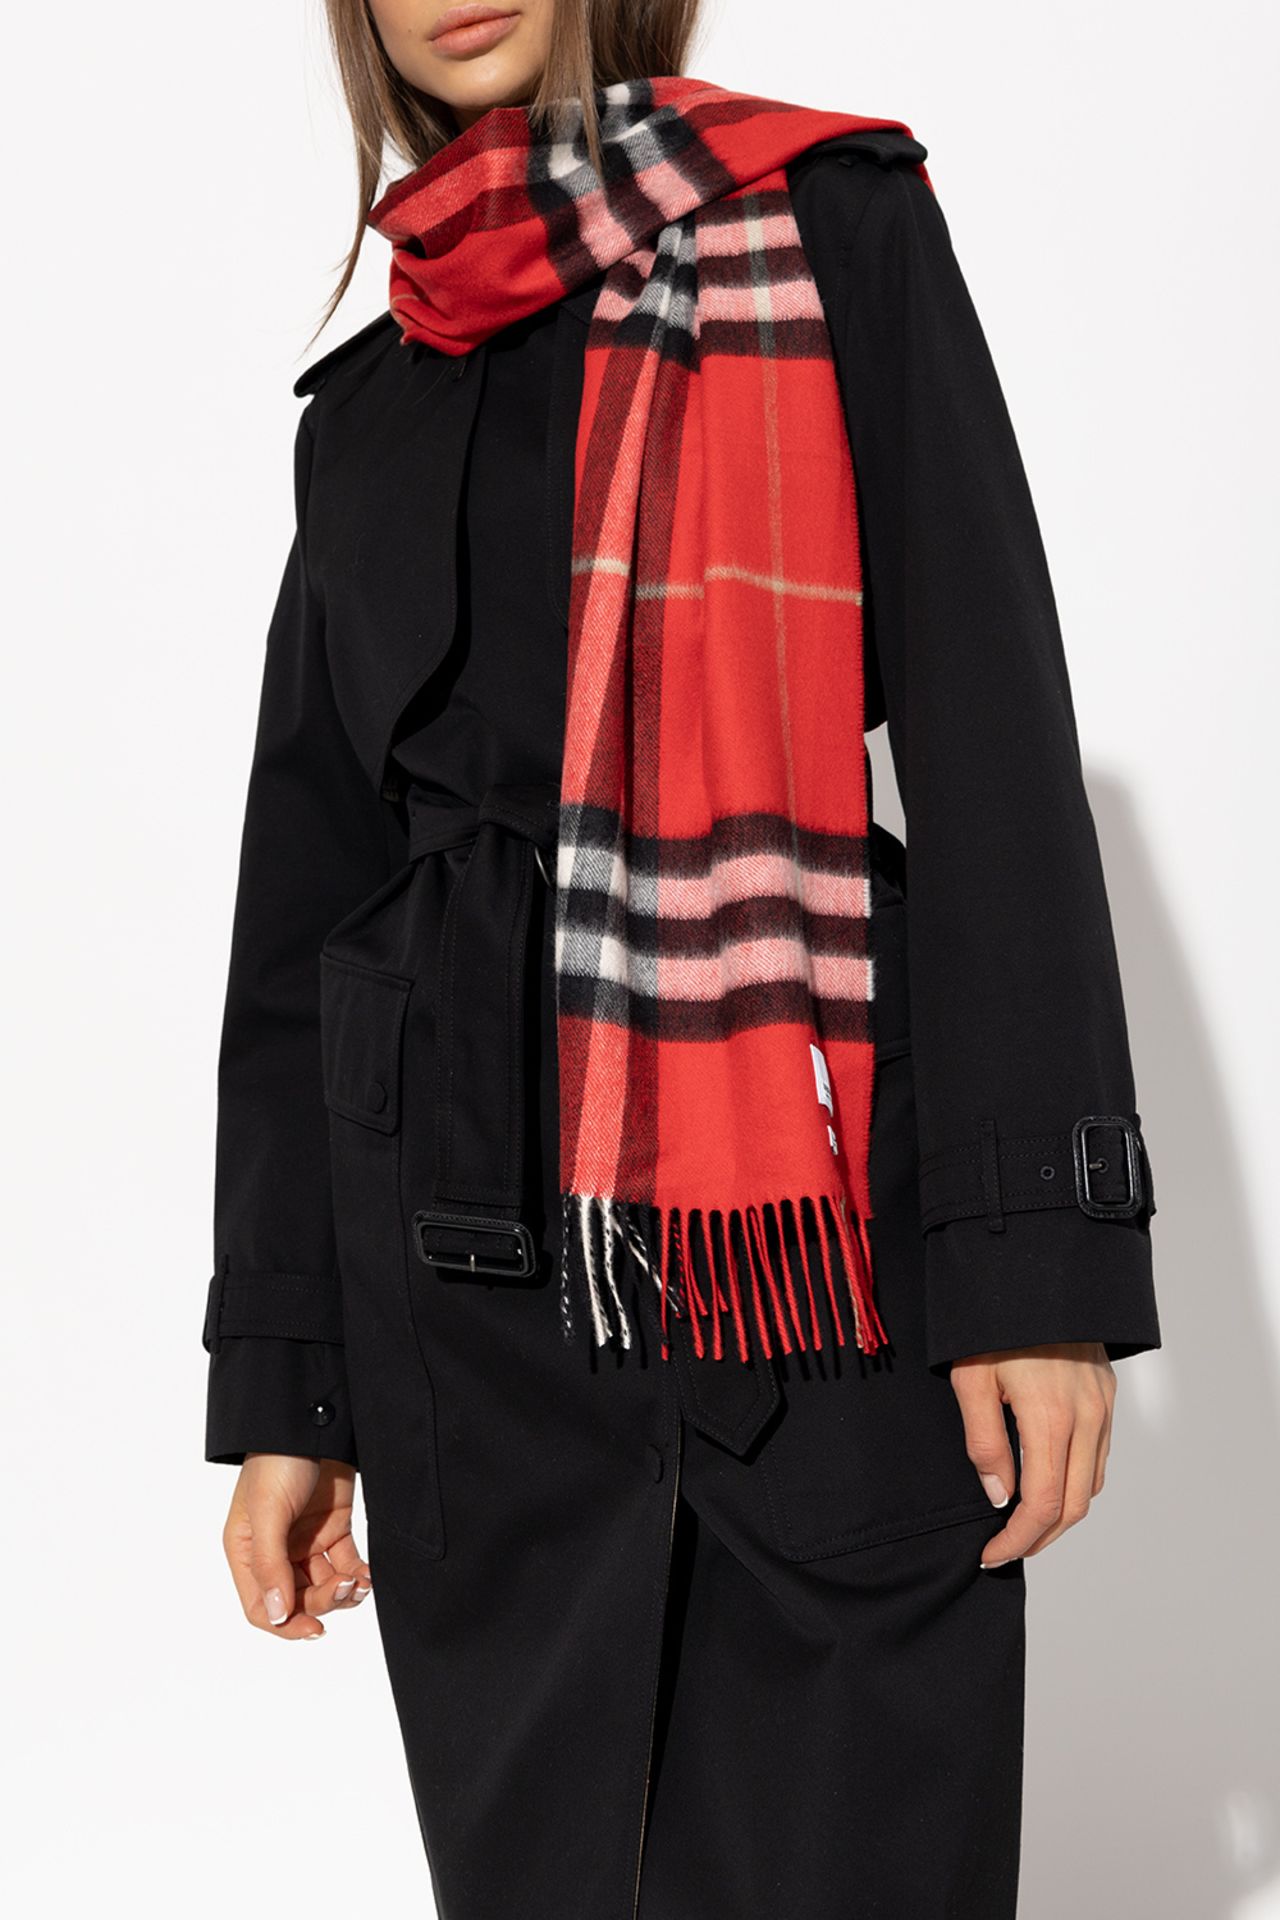 Genuine Burberry Red/Blue Tartan Scarf with spots